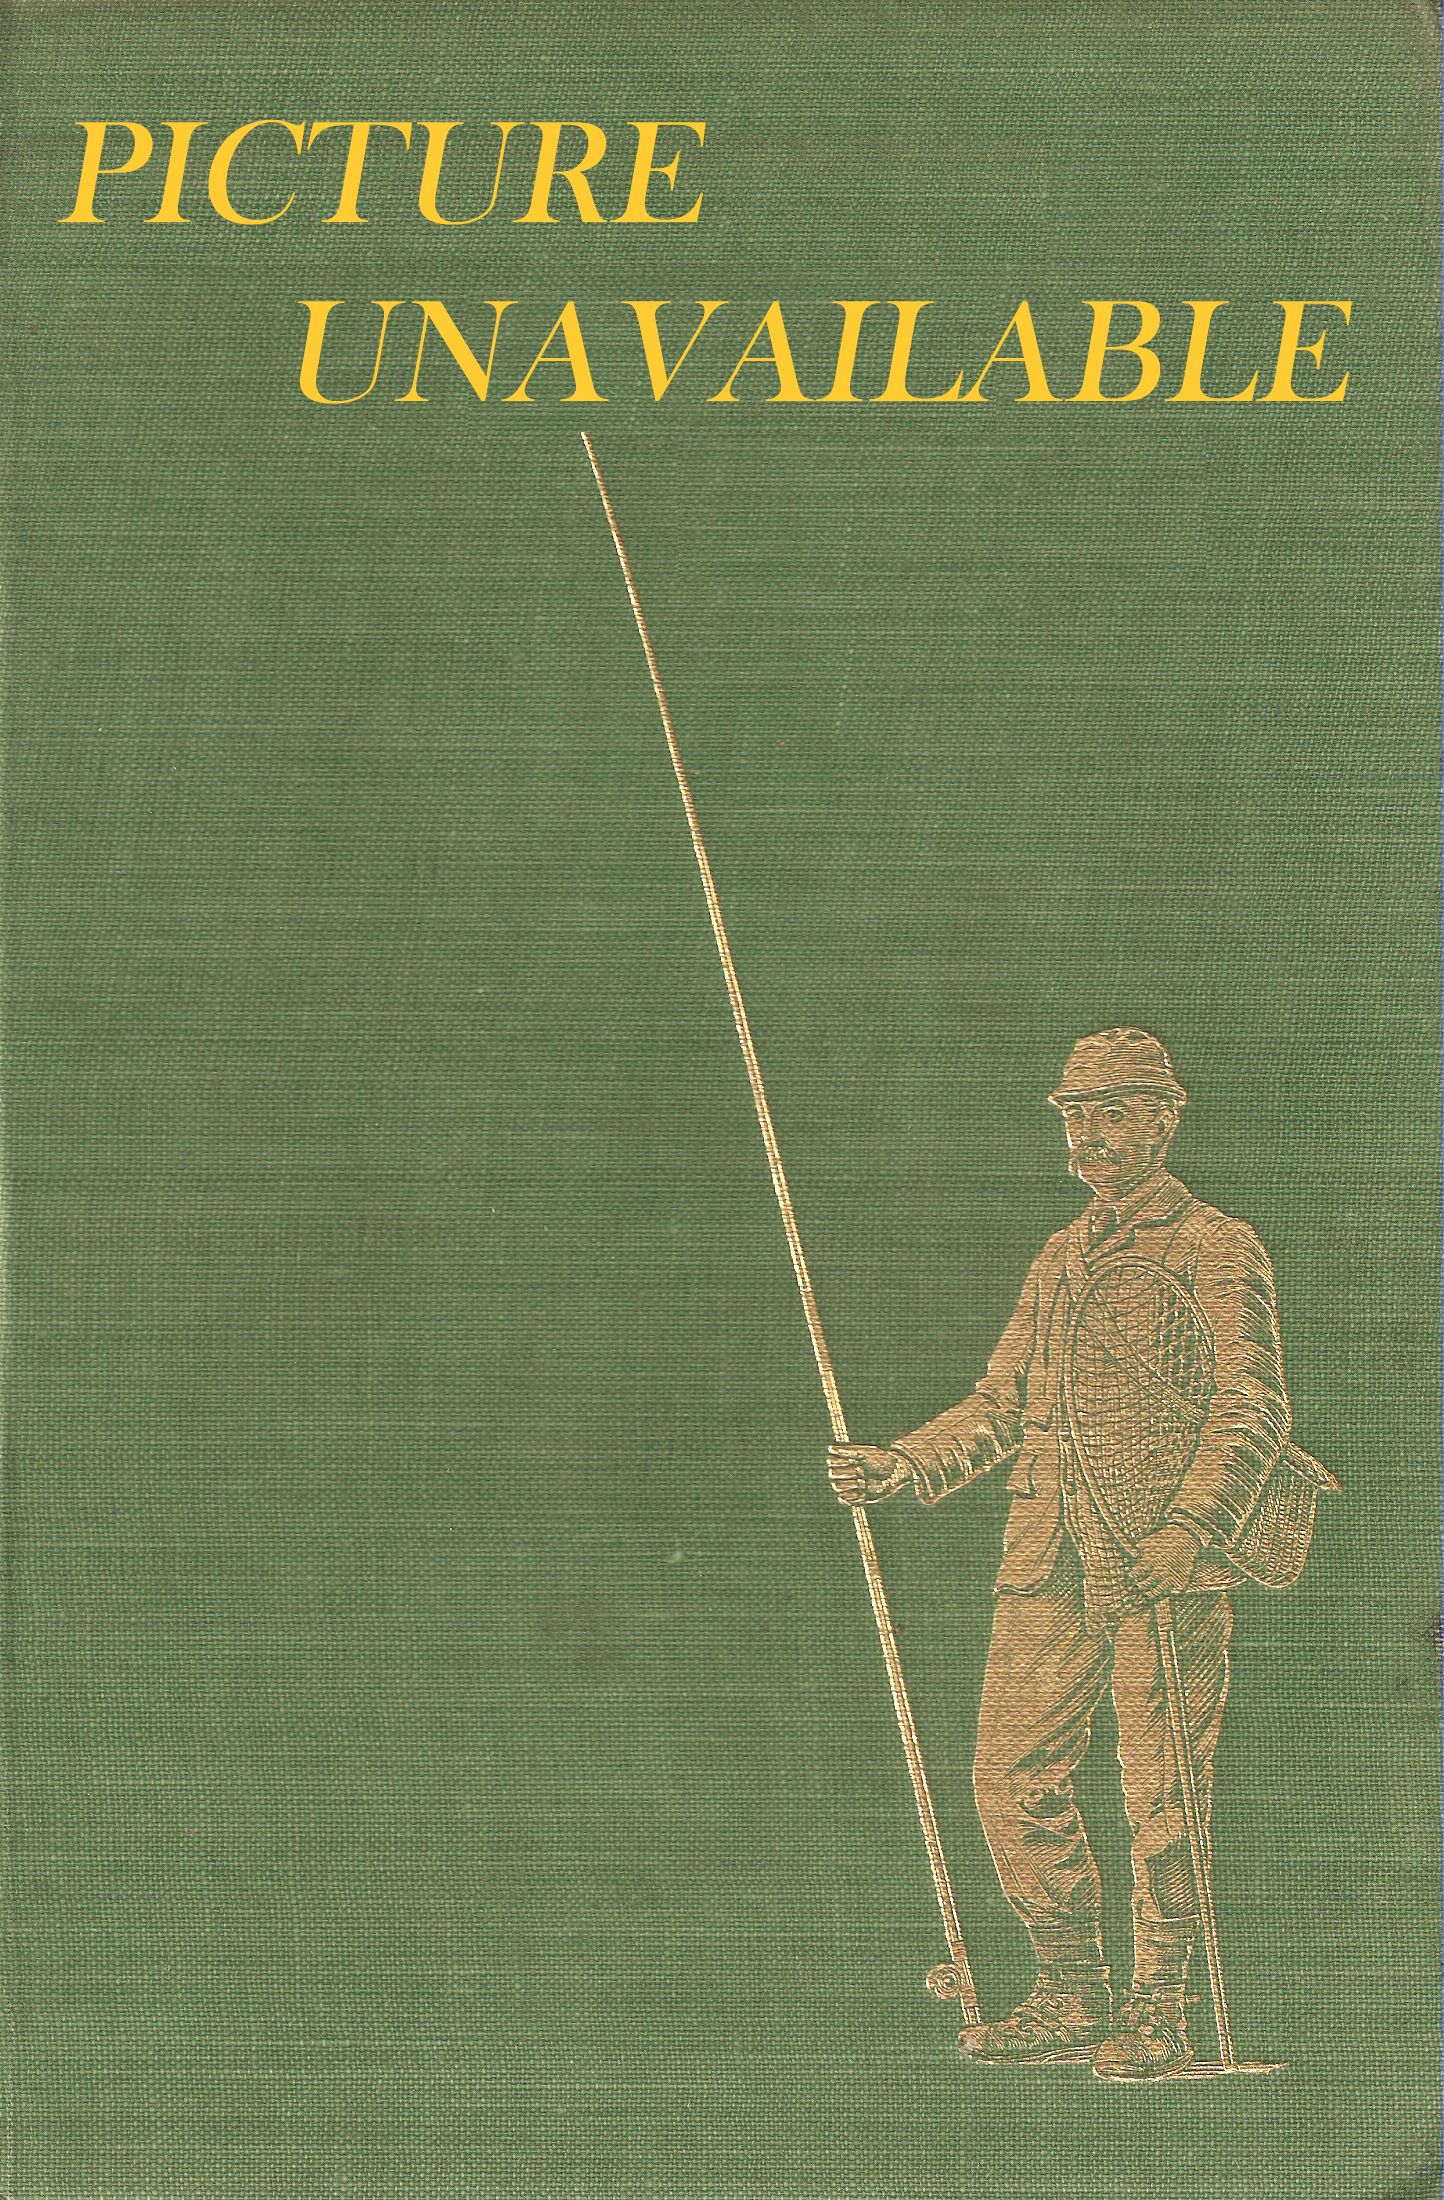 A HISTORY OF ANGLING. By Charles Chenevix Trench.